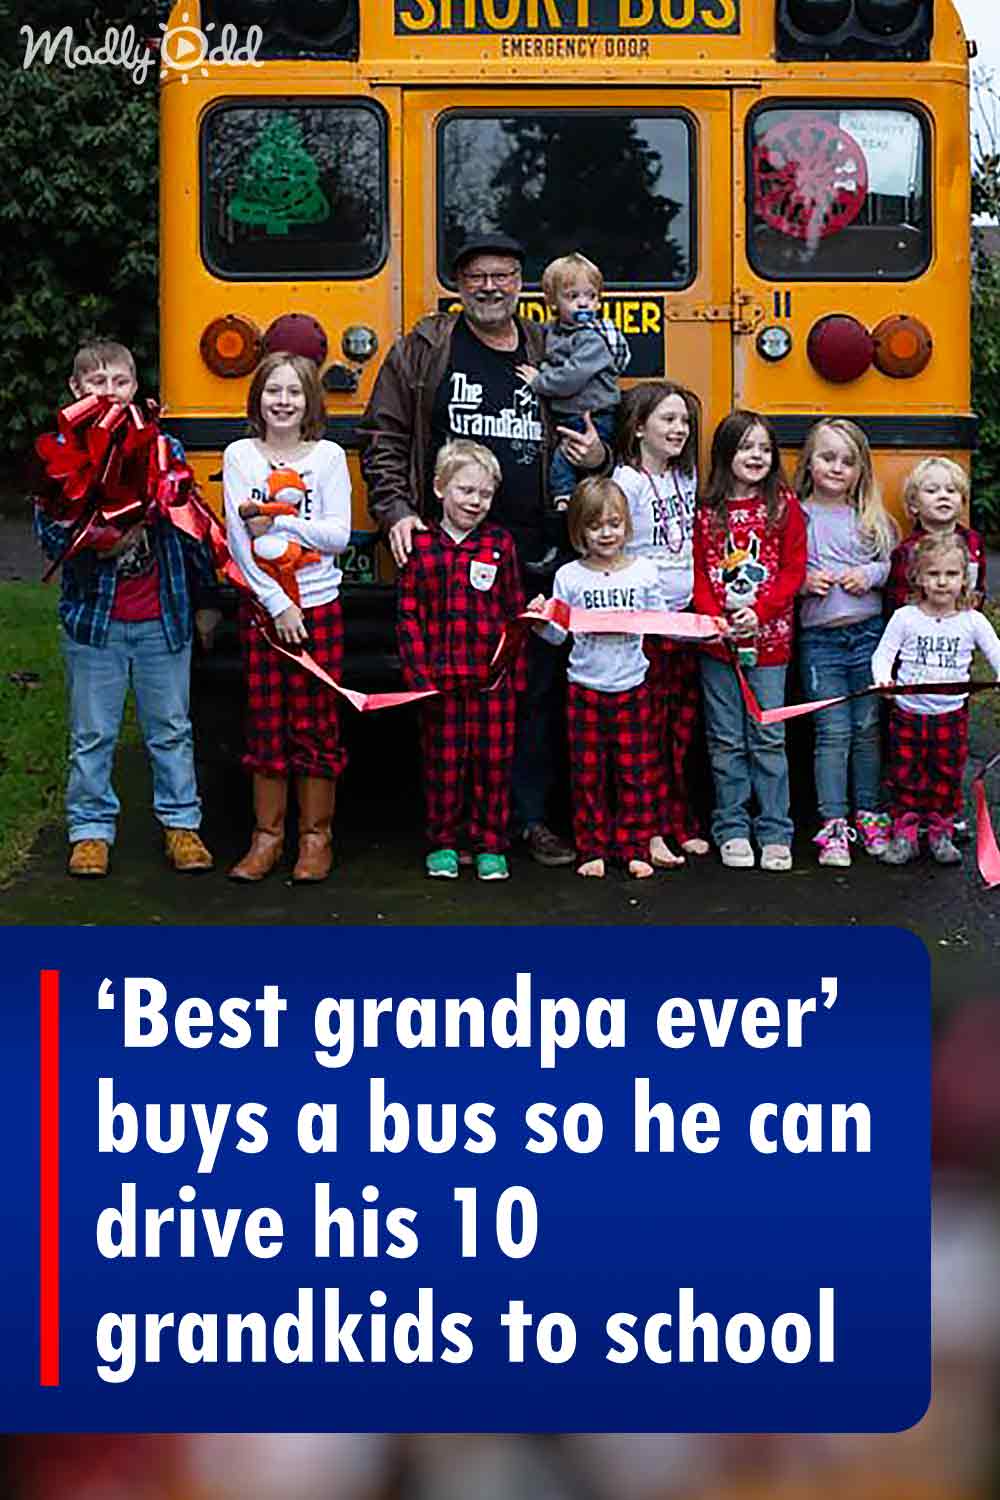 ‘Best grandpa ever’ buys a bus so he can drive his 10 grandkids to school